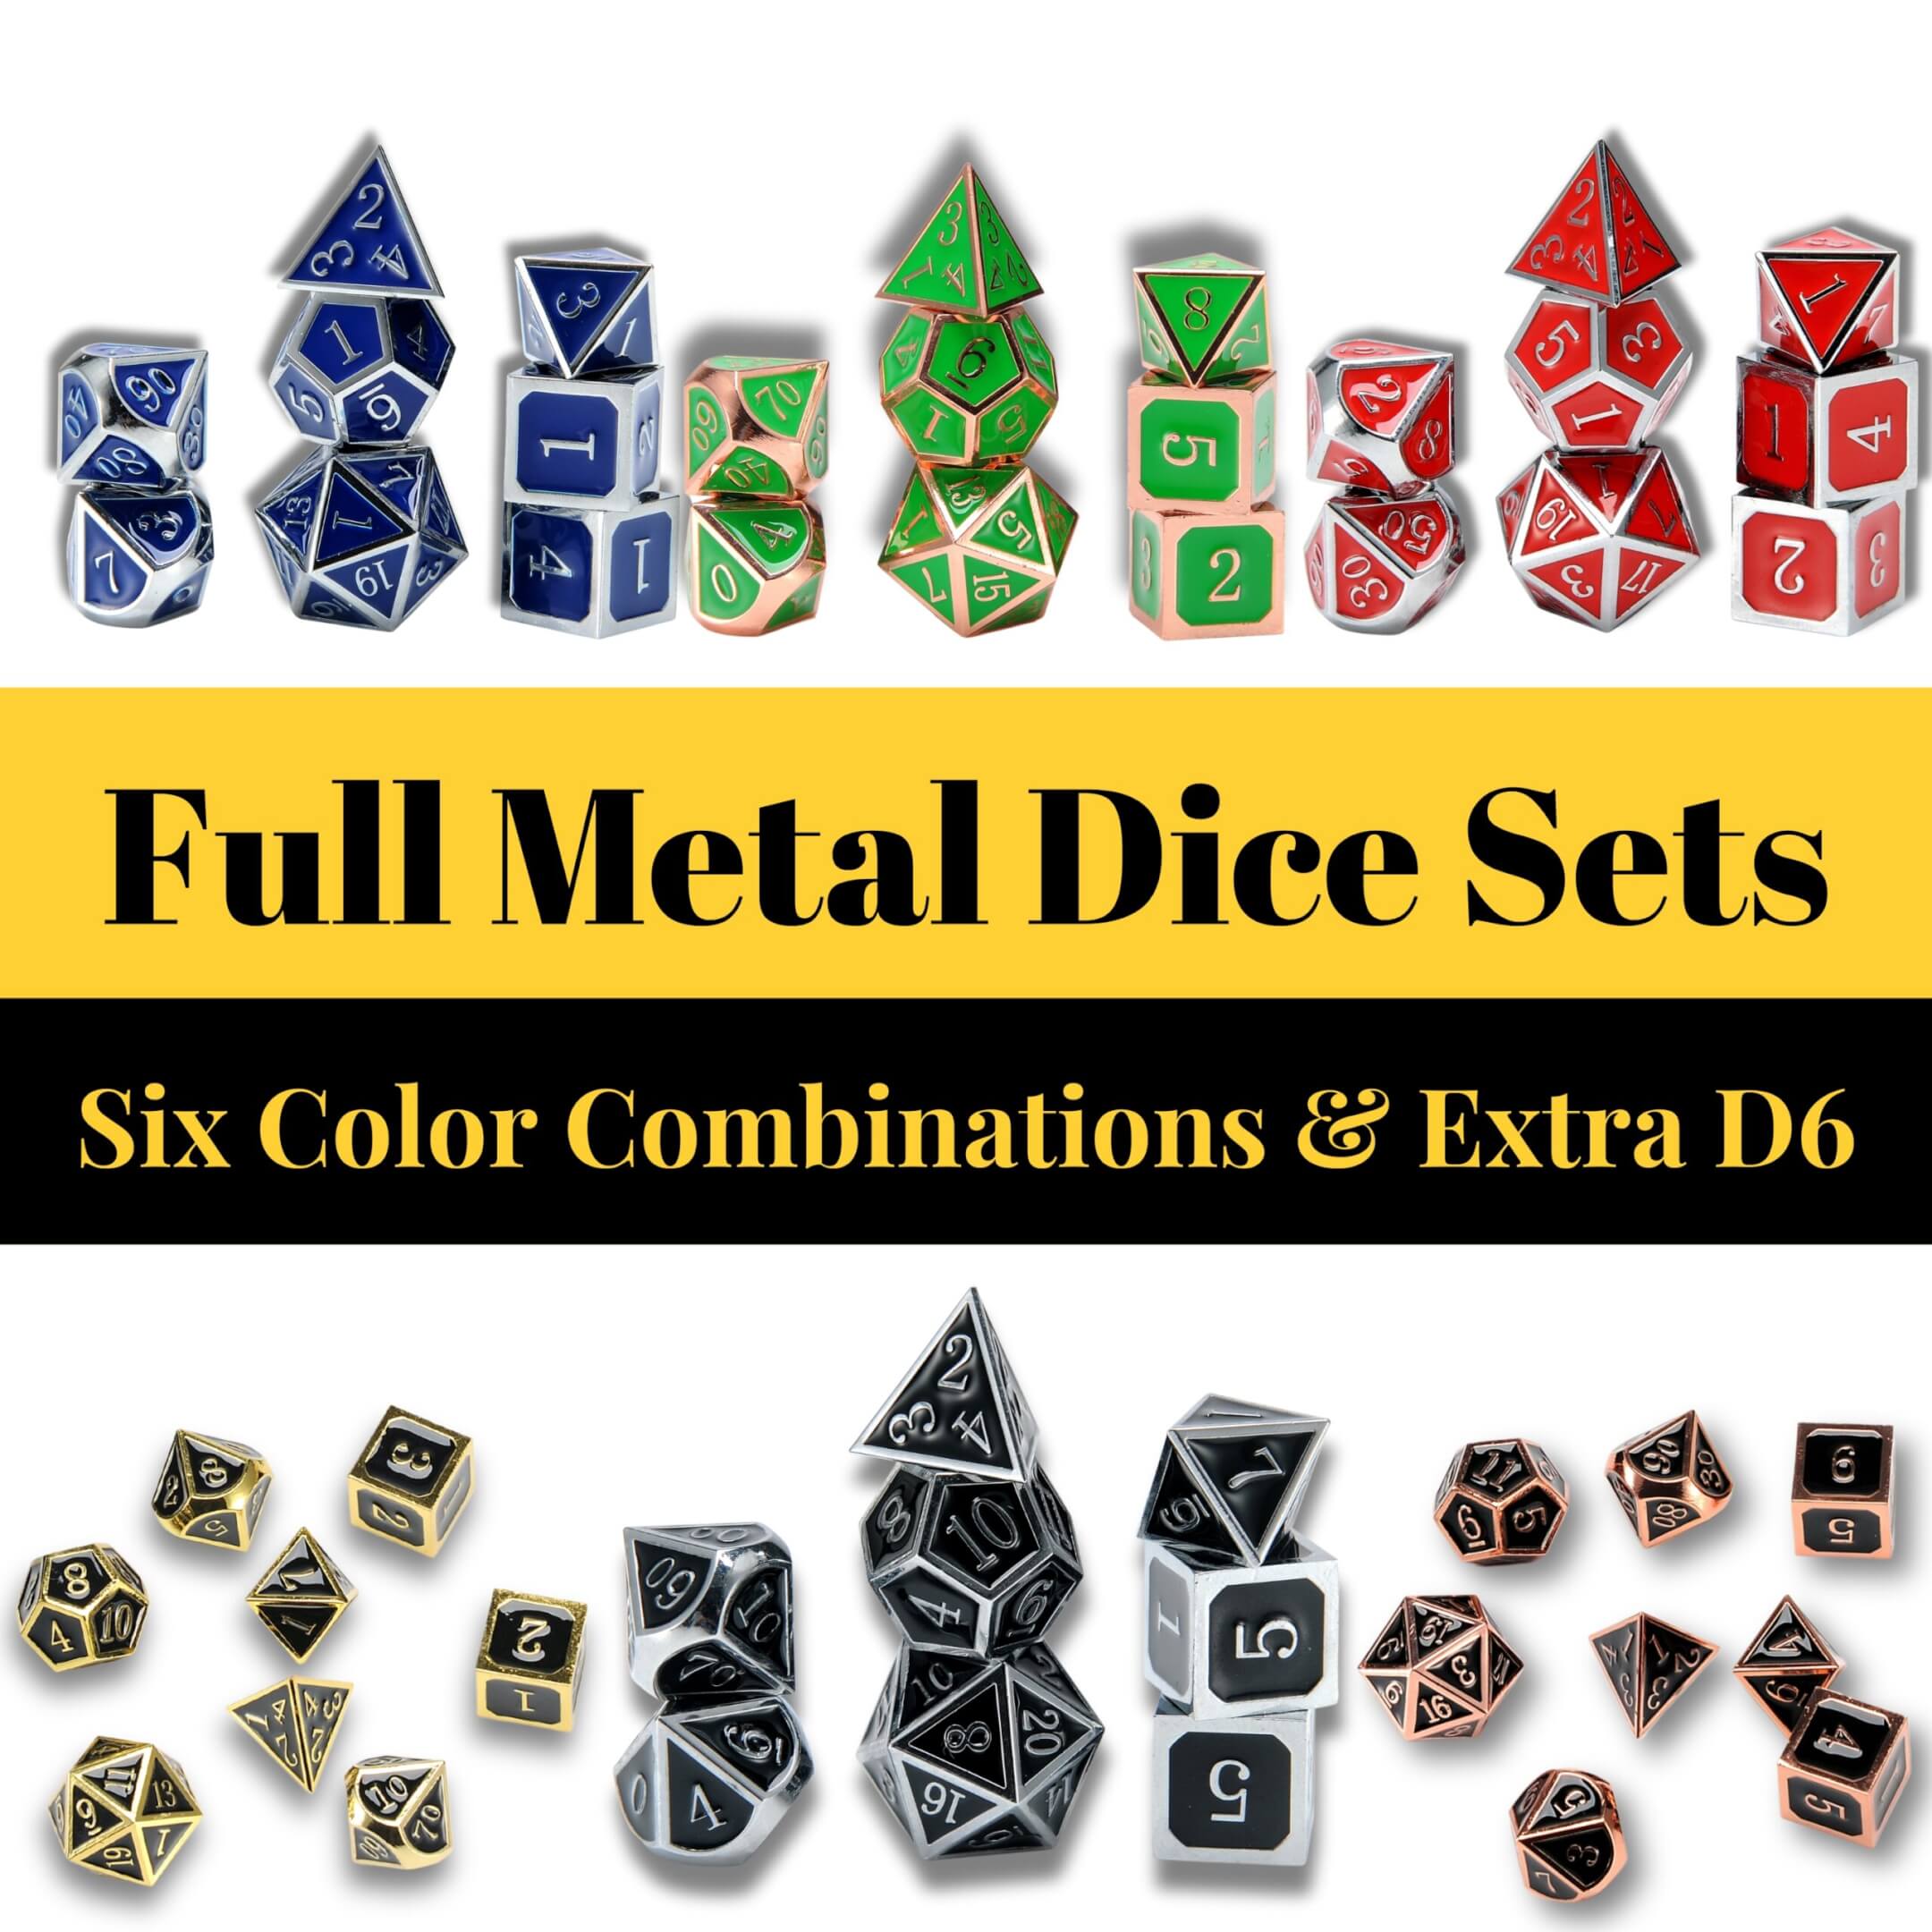 Full Metal Dice Available in 6 colors